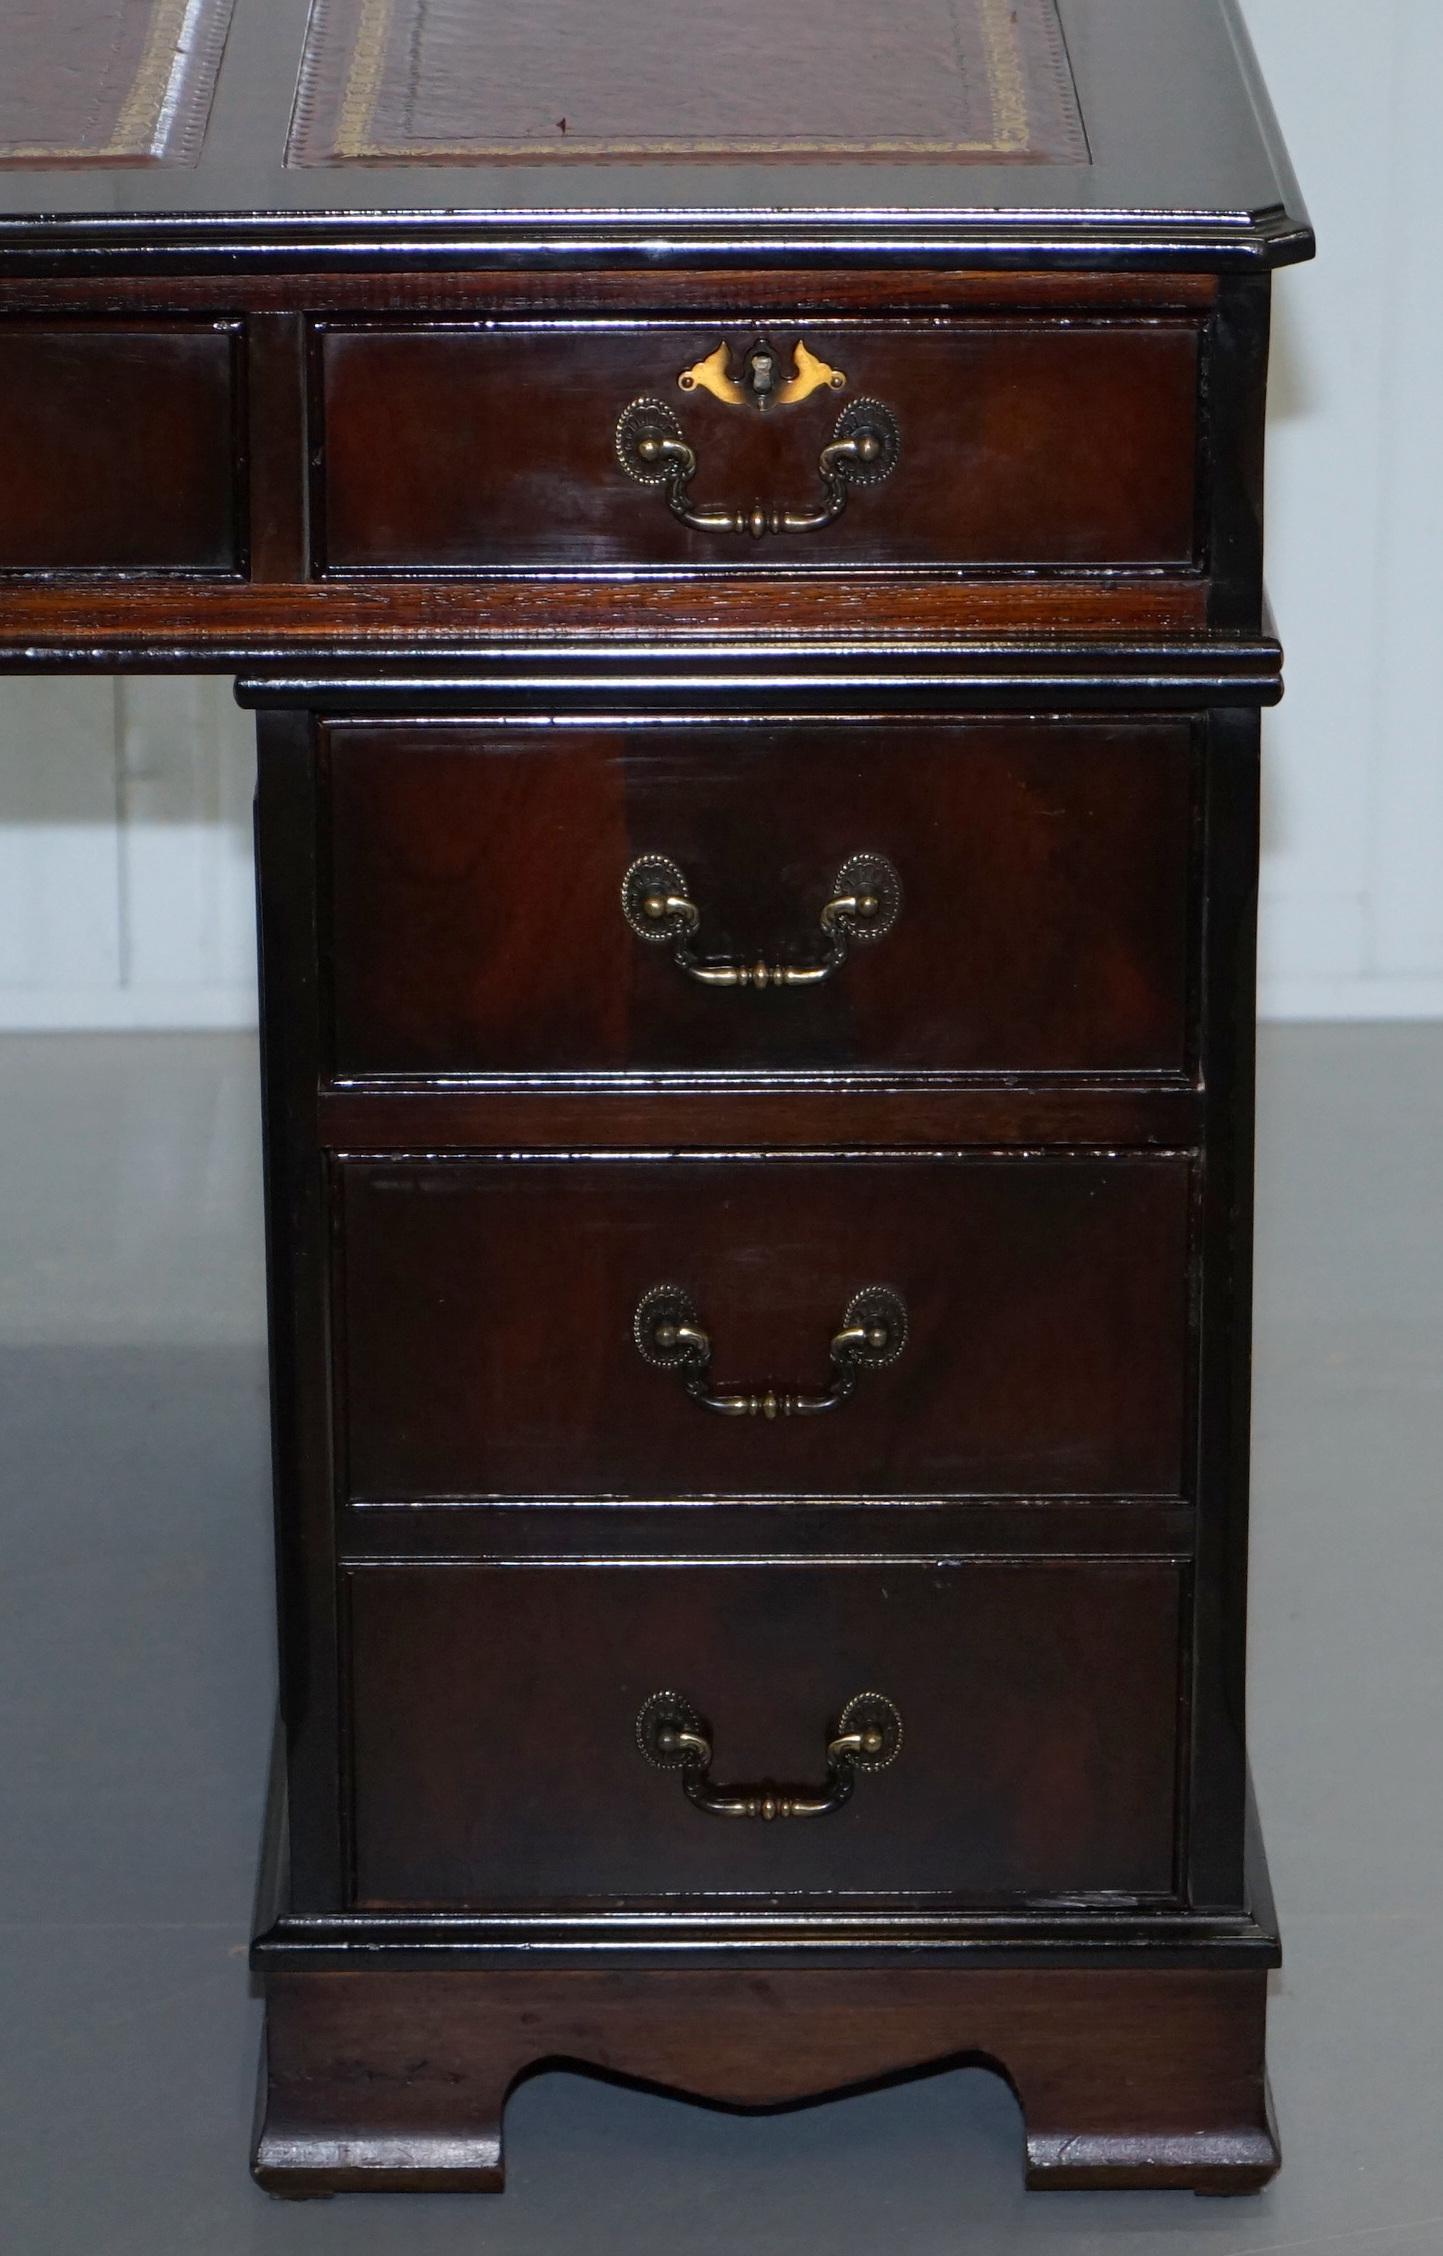 Lovely Solid Mahogany Twin Pedestal Partner Desk Oxblood Leather Writing Surface 4